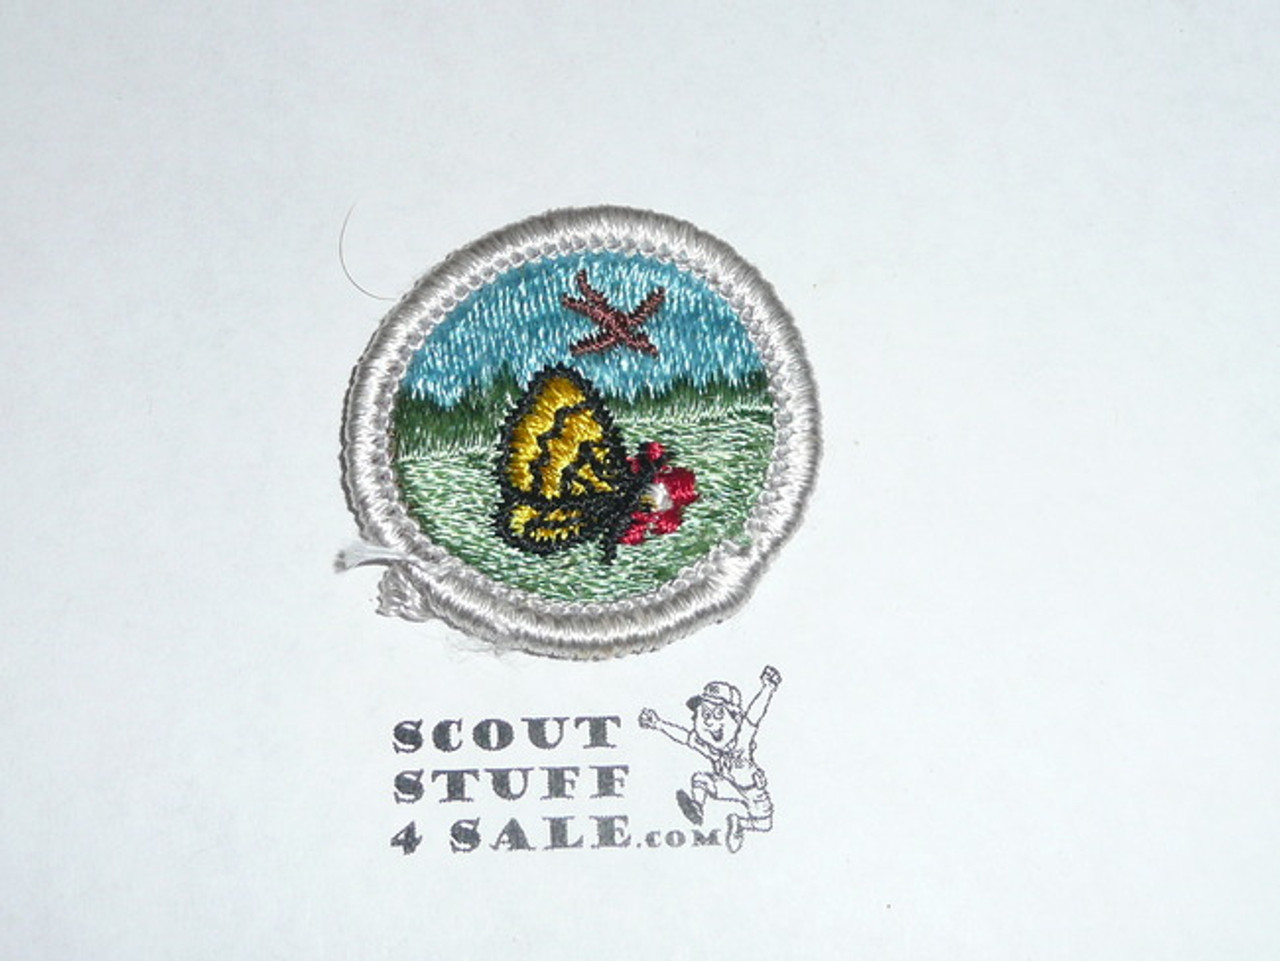 Nature (Silver bdr) - Type G - Fully Embroidered Cloth Back Merit Badge (1961-1971)